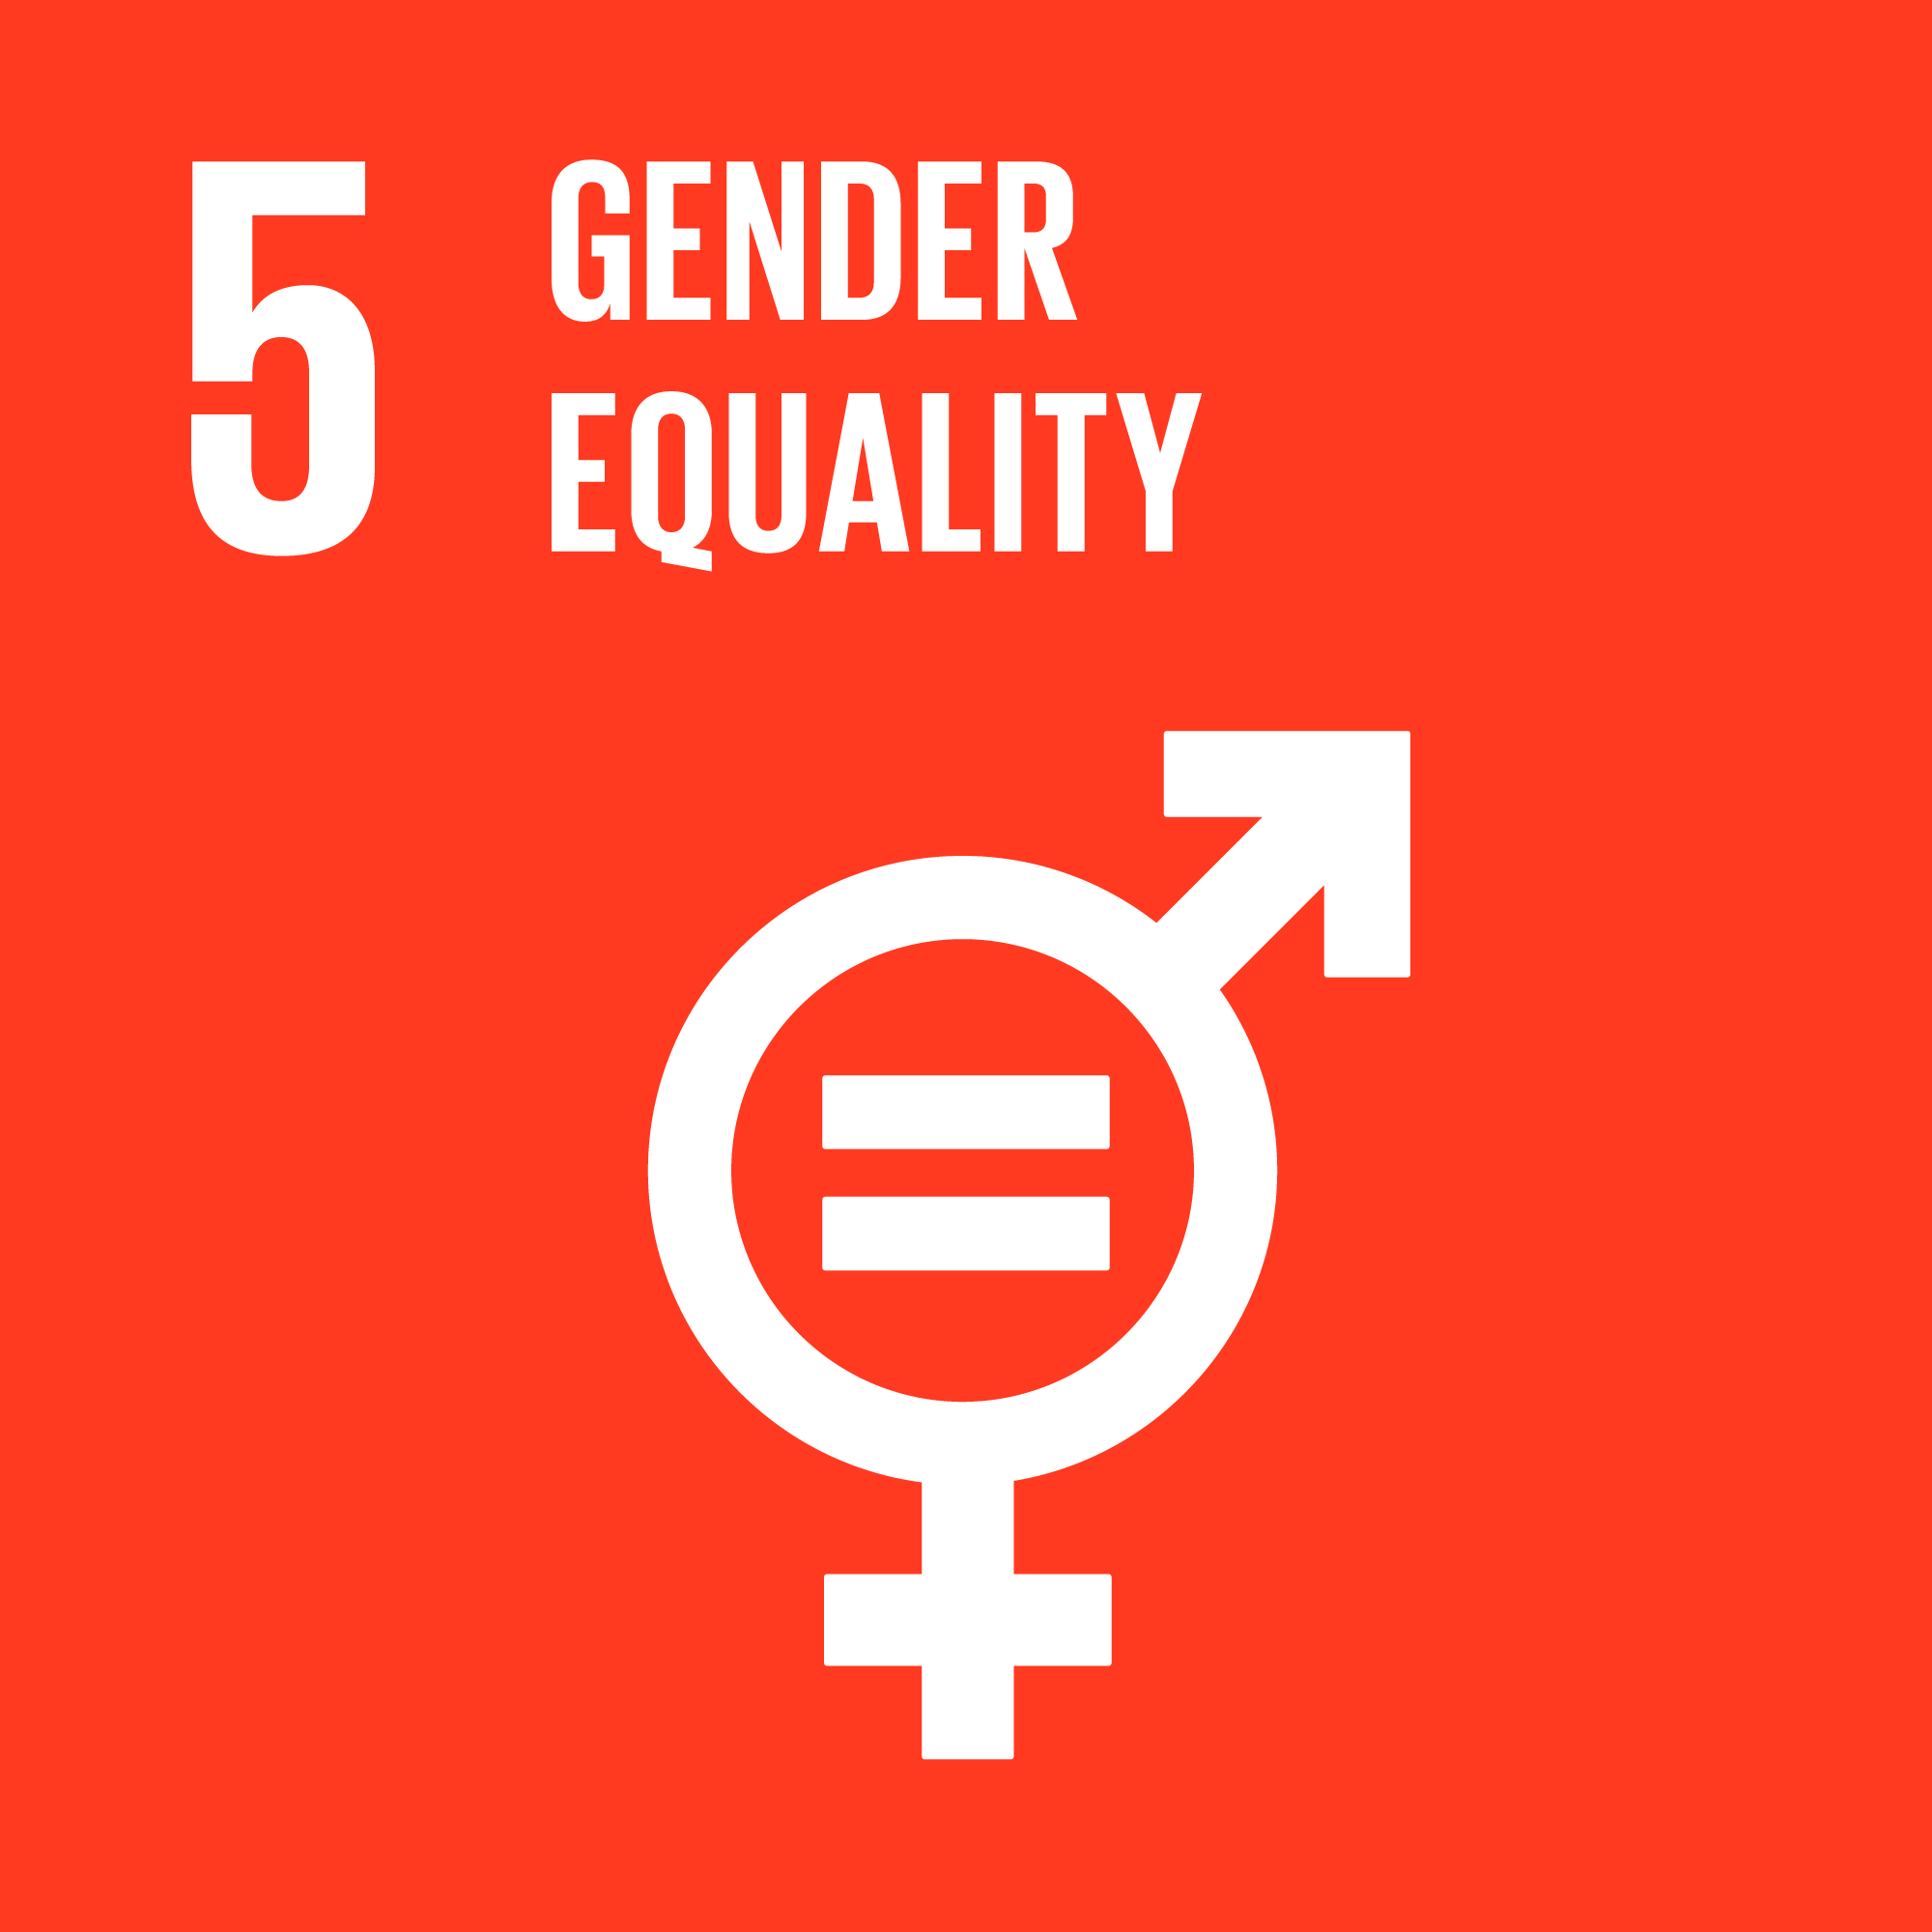 Goal 5: Gender Equality - Achieve gender equality and empower all women and girls.